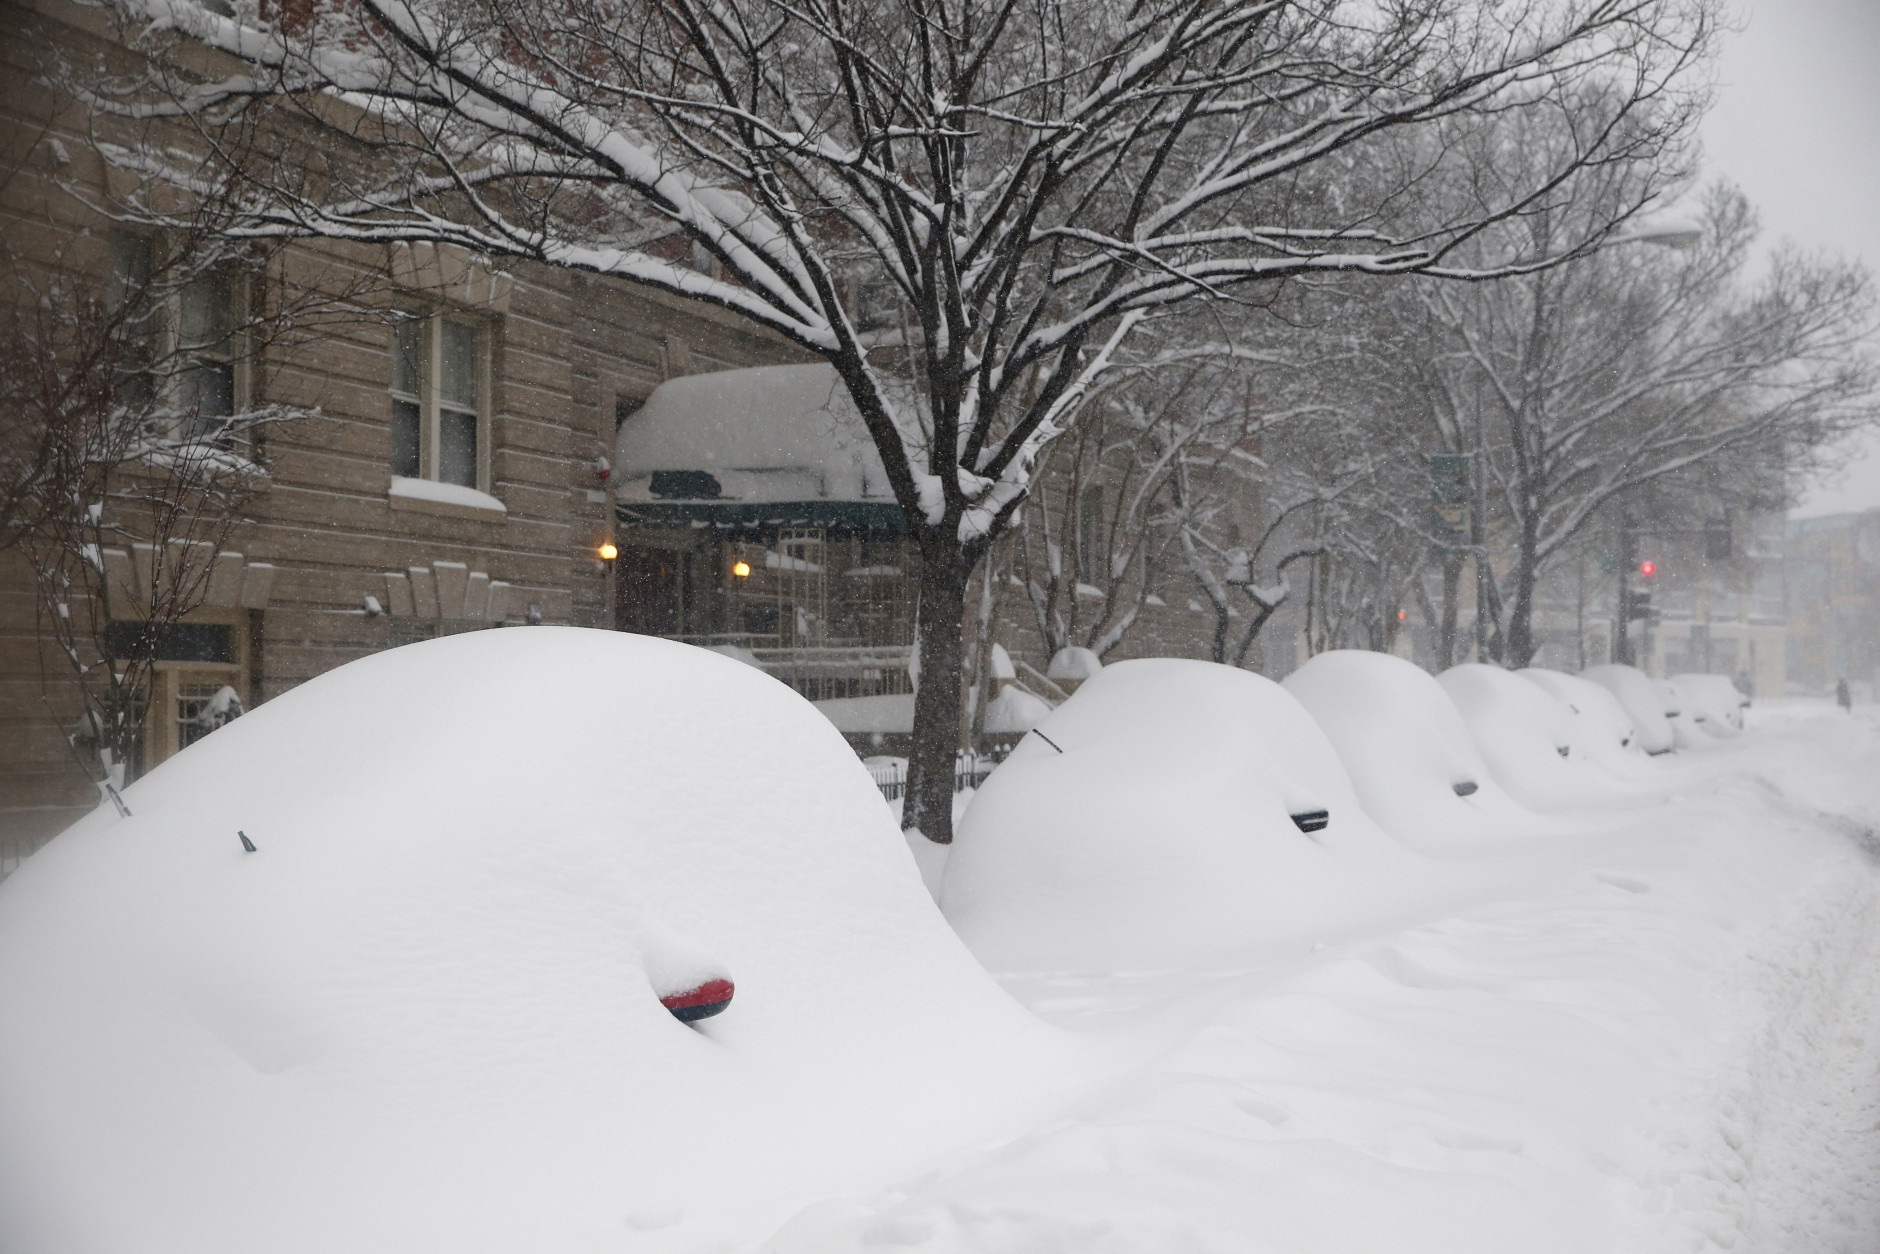 Parked cars are almost completely covered by the snow, Saturday, Jan. 23, 2016 in Washington. A blizzard with hurricane-force winds brought much of the East Coast to a standstill Saturday, dumping as much as 3 feet of snow, stranding tens of thousands of travelers and shutting down the nation's capital and its largest city. (AP Photo/Alex Brandon)